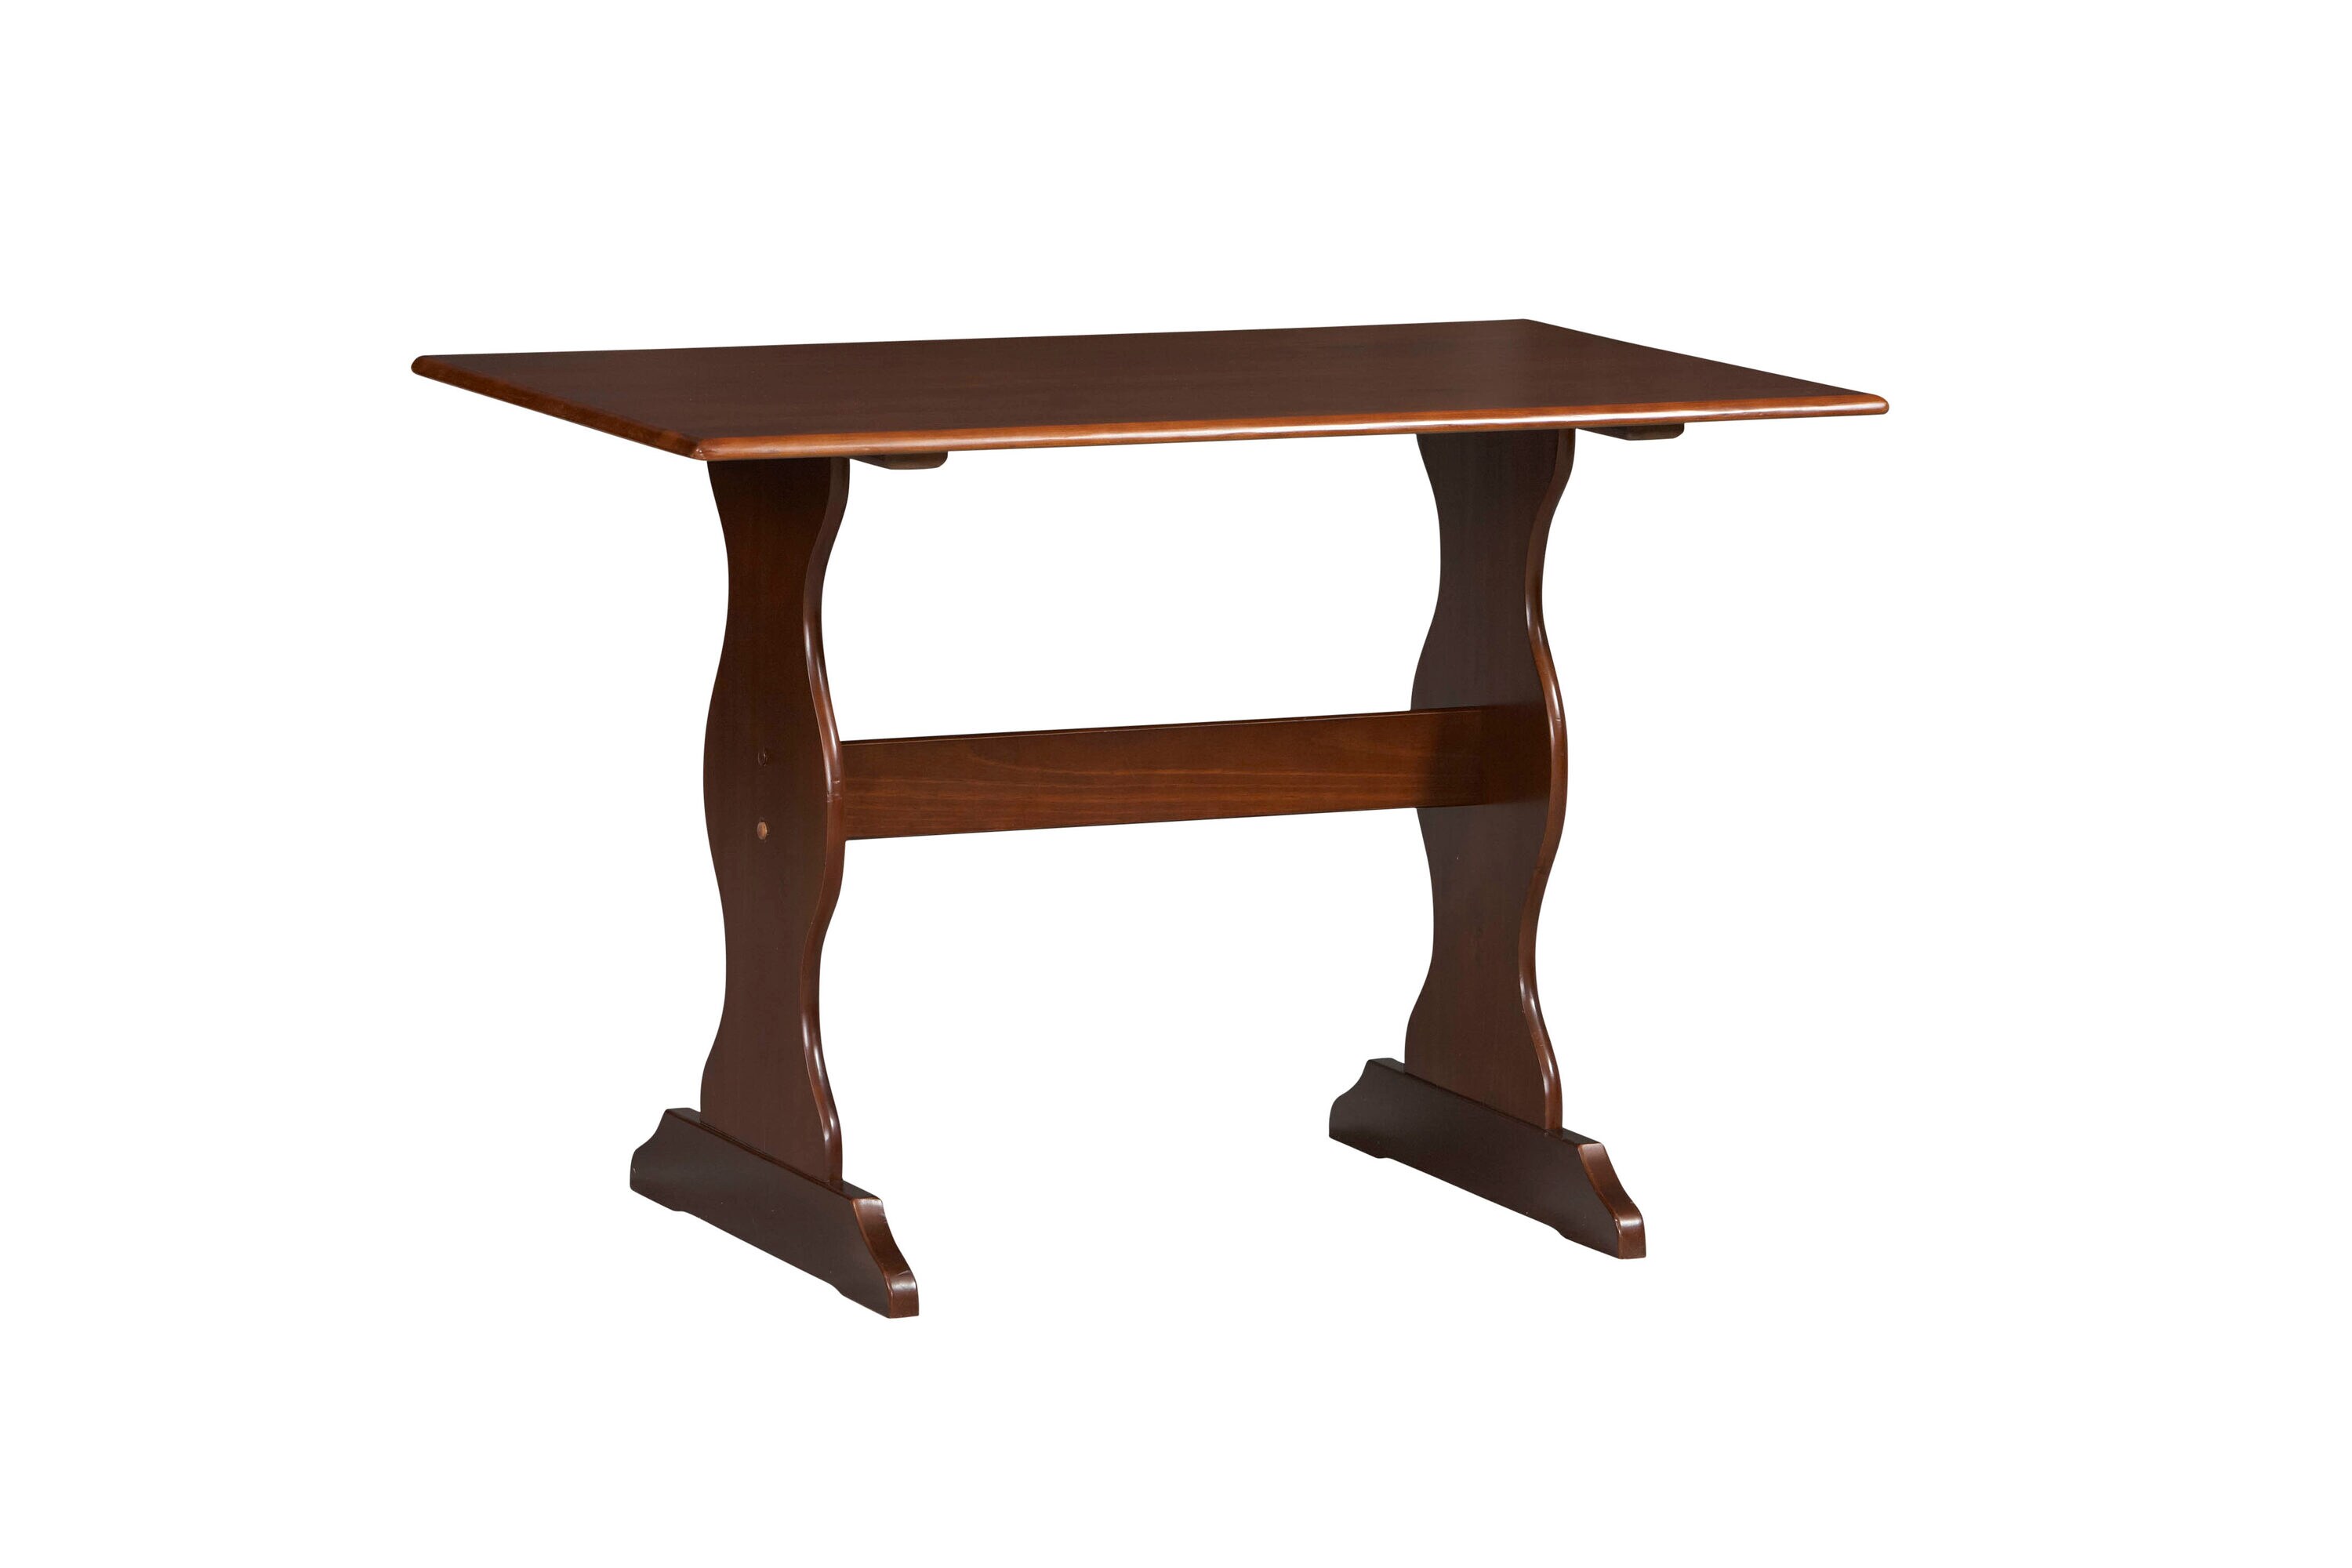 Chelsea Walnut Table Walnut Traditional Dining Table, Wood with Pine Wood Base in Brown | - Linon 90368WAL-01-KD-U